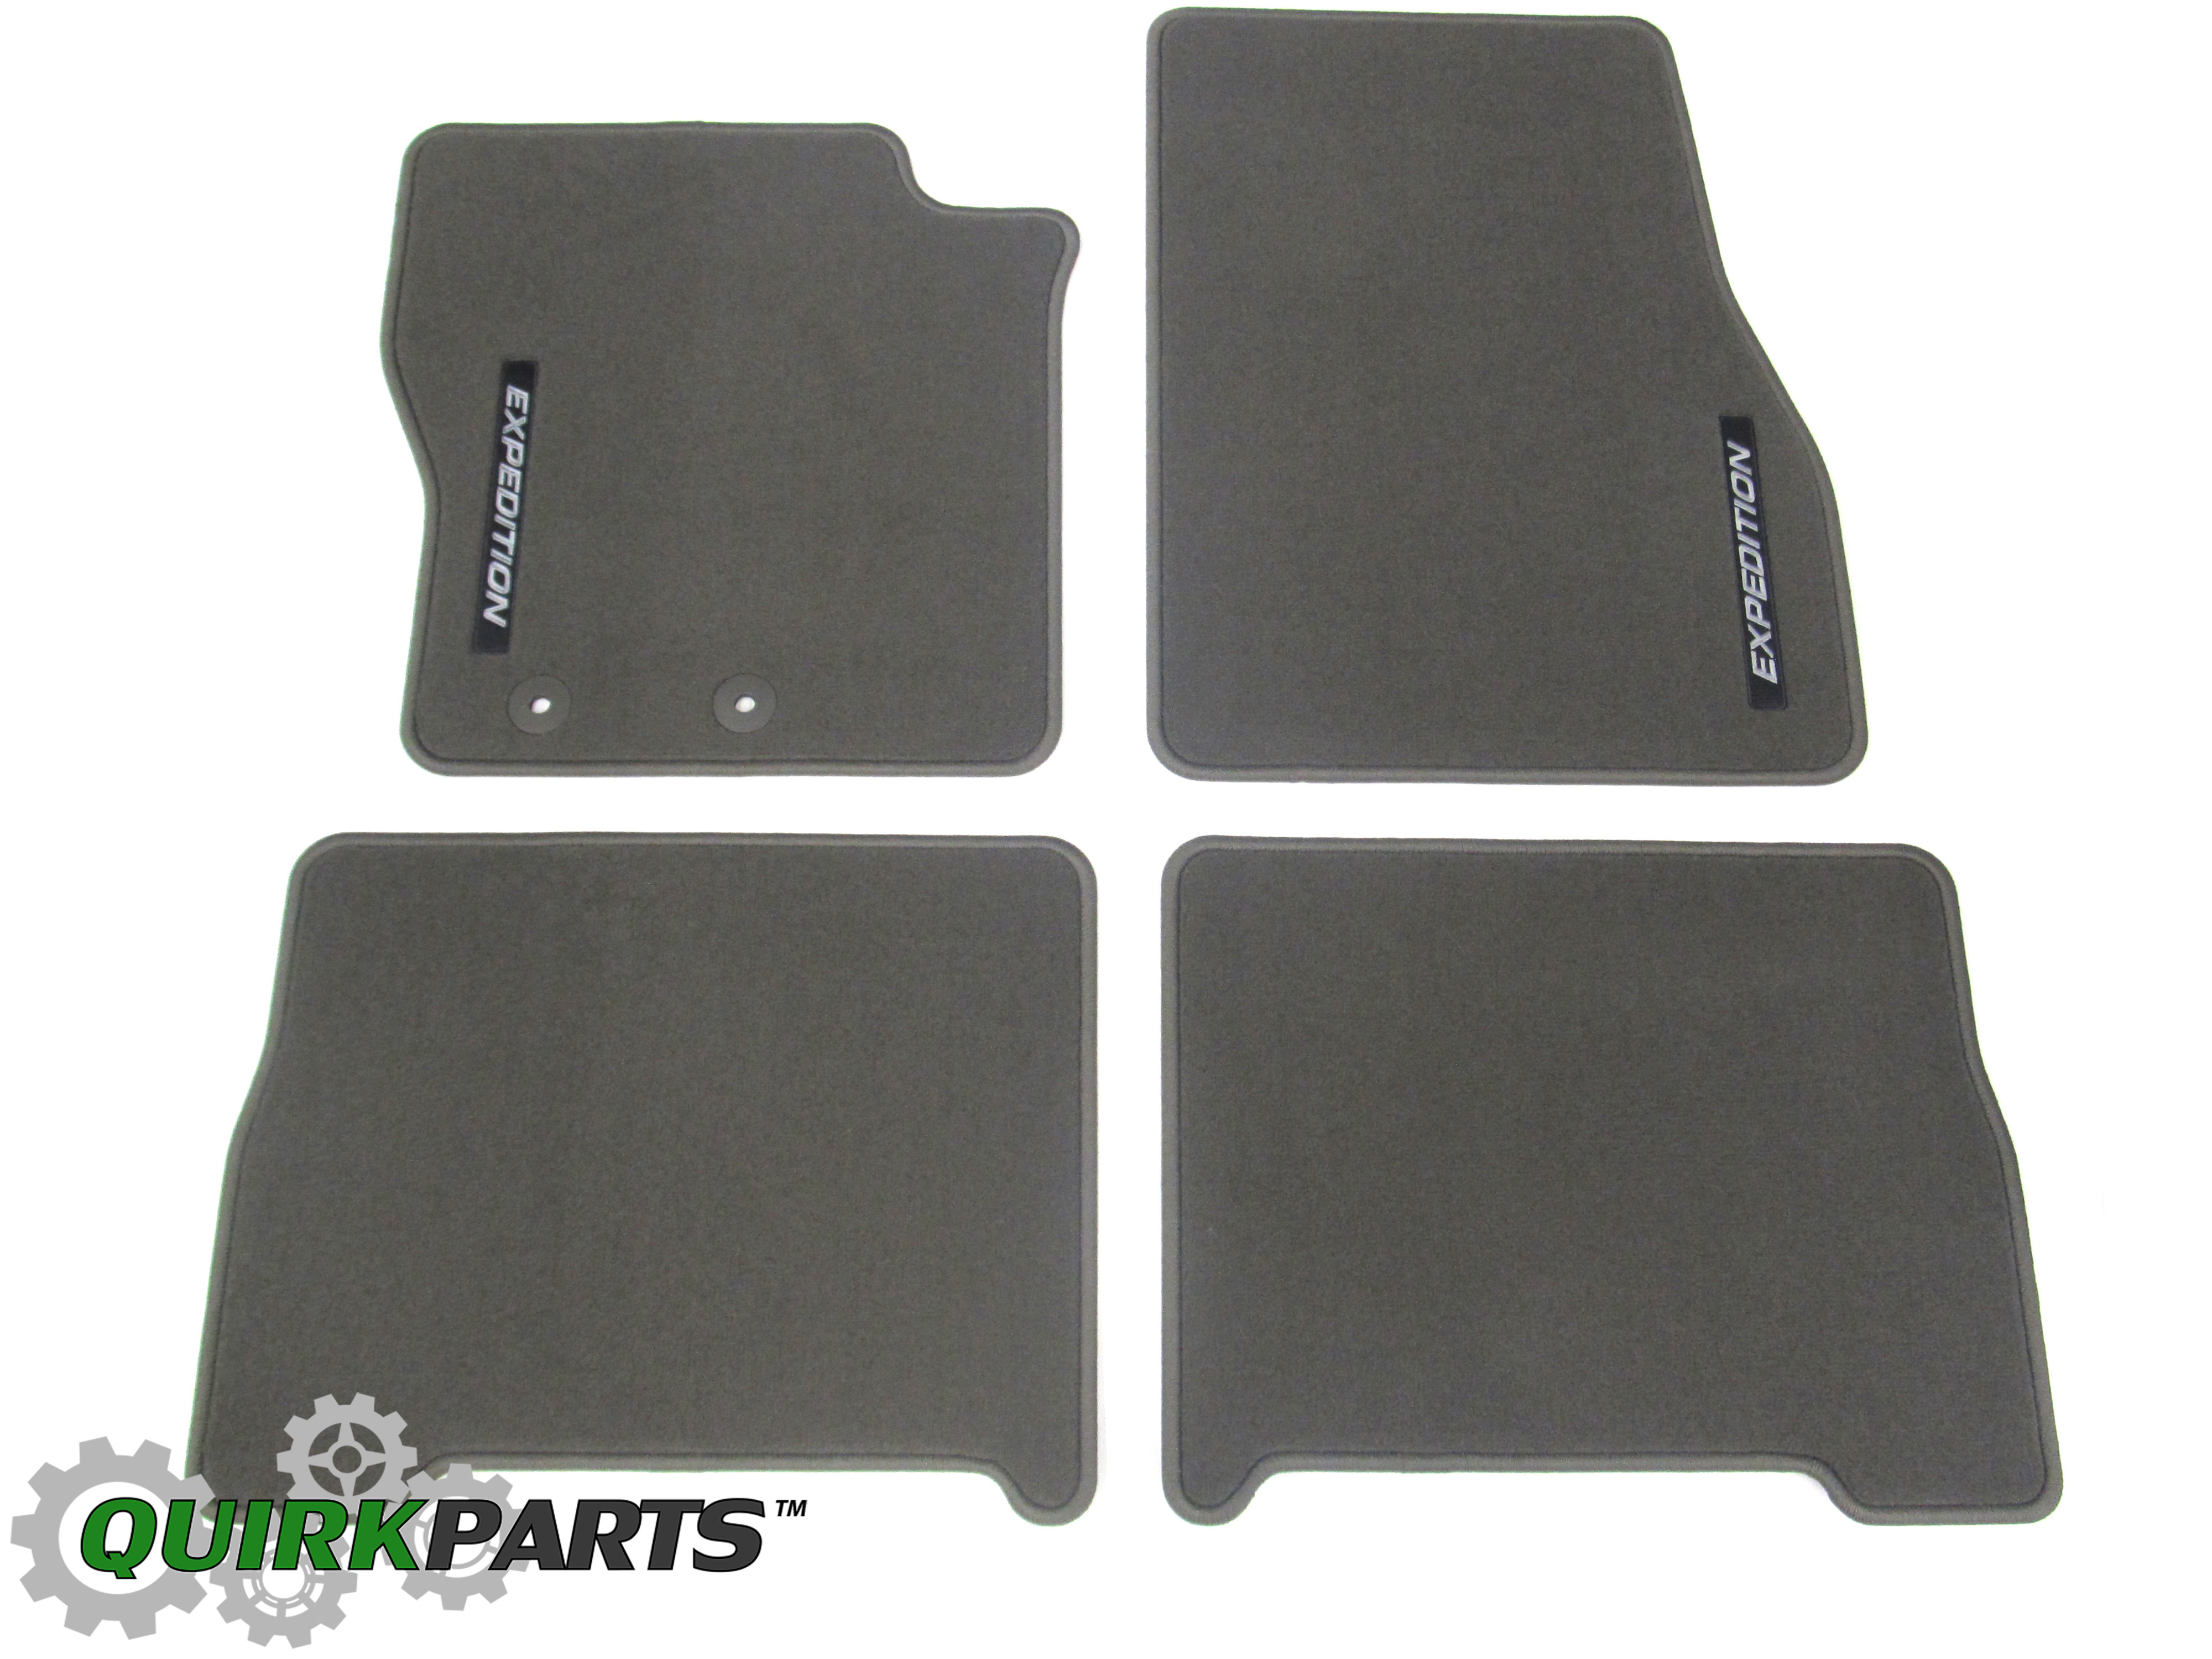 2005 Ford expedition oem floor mats #6